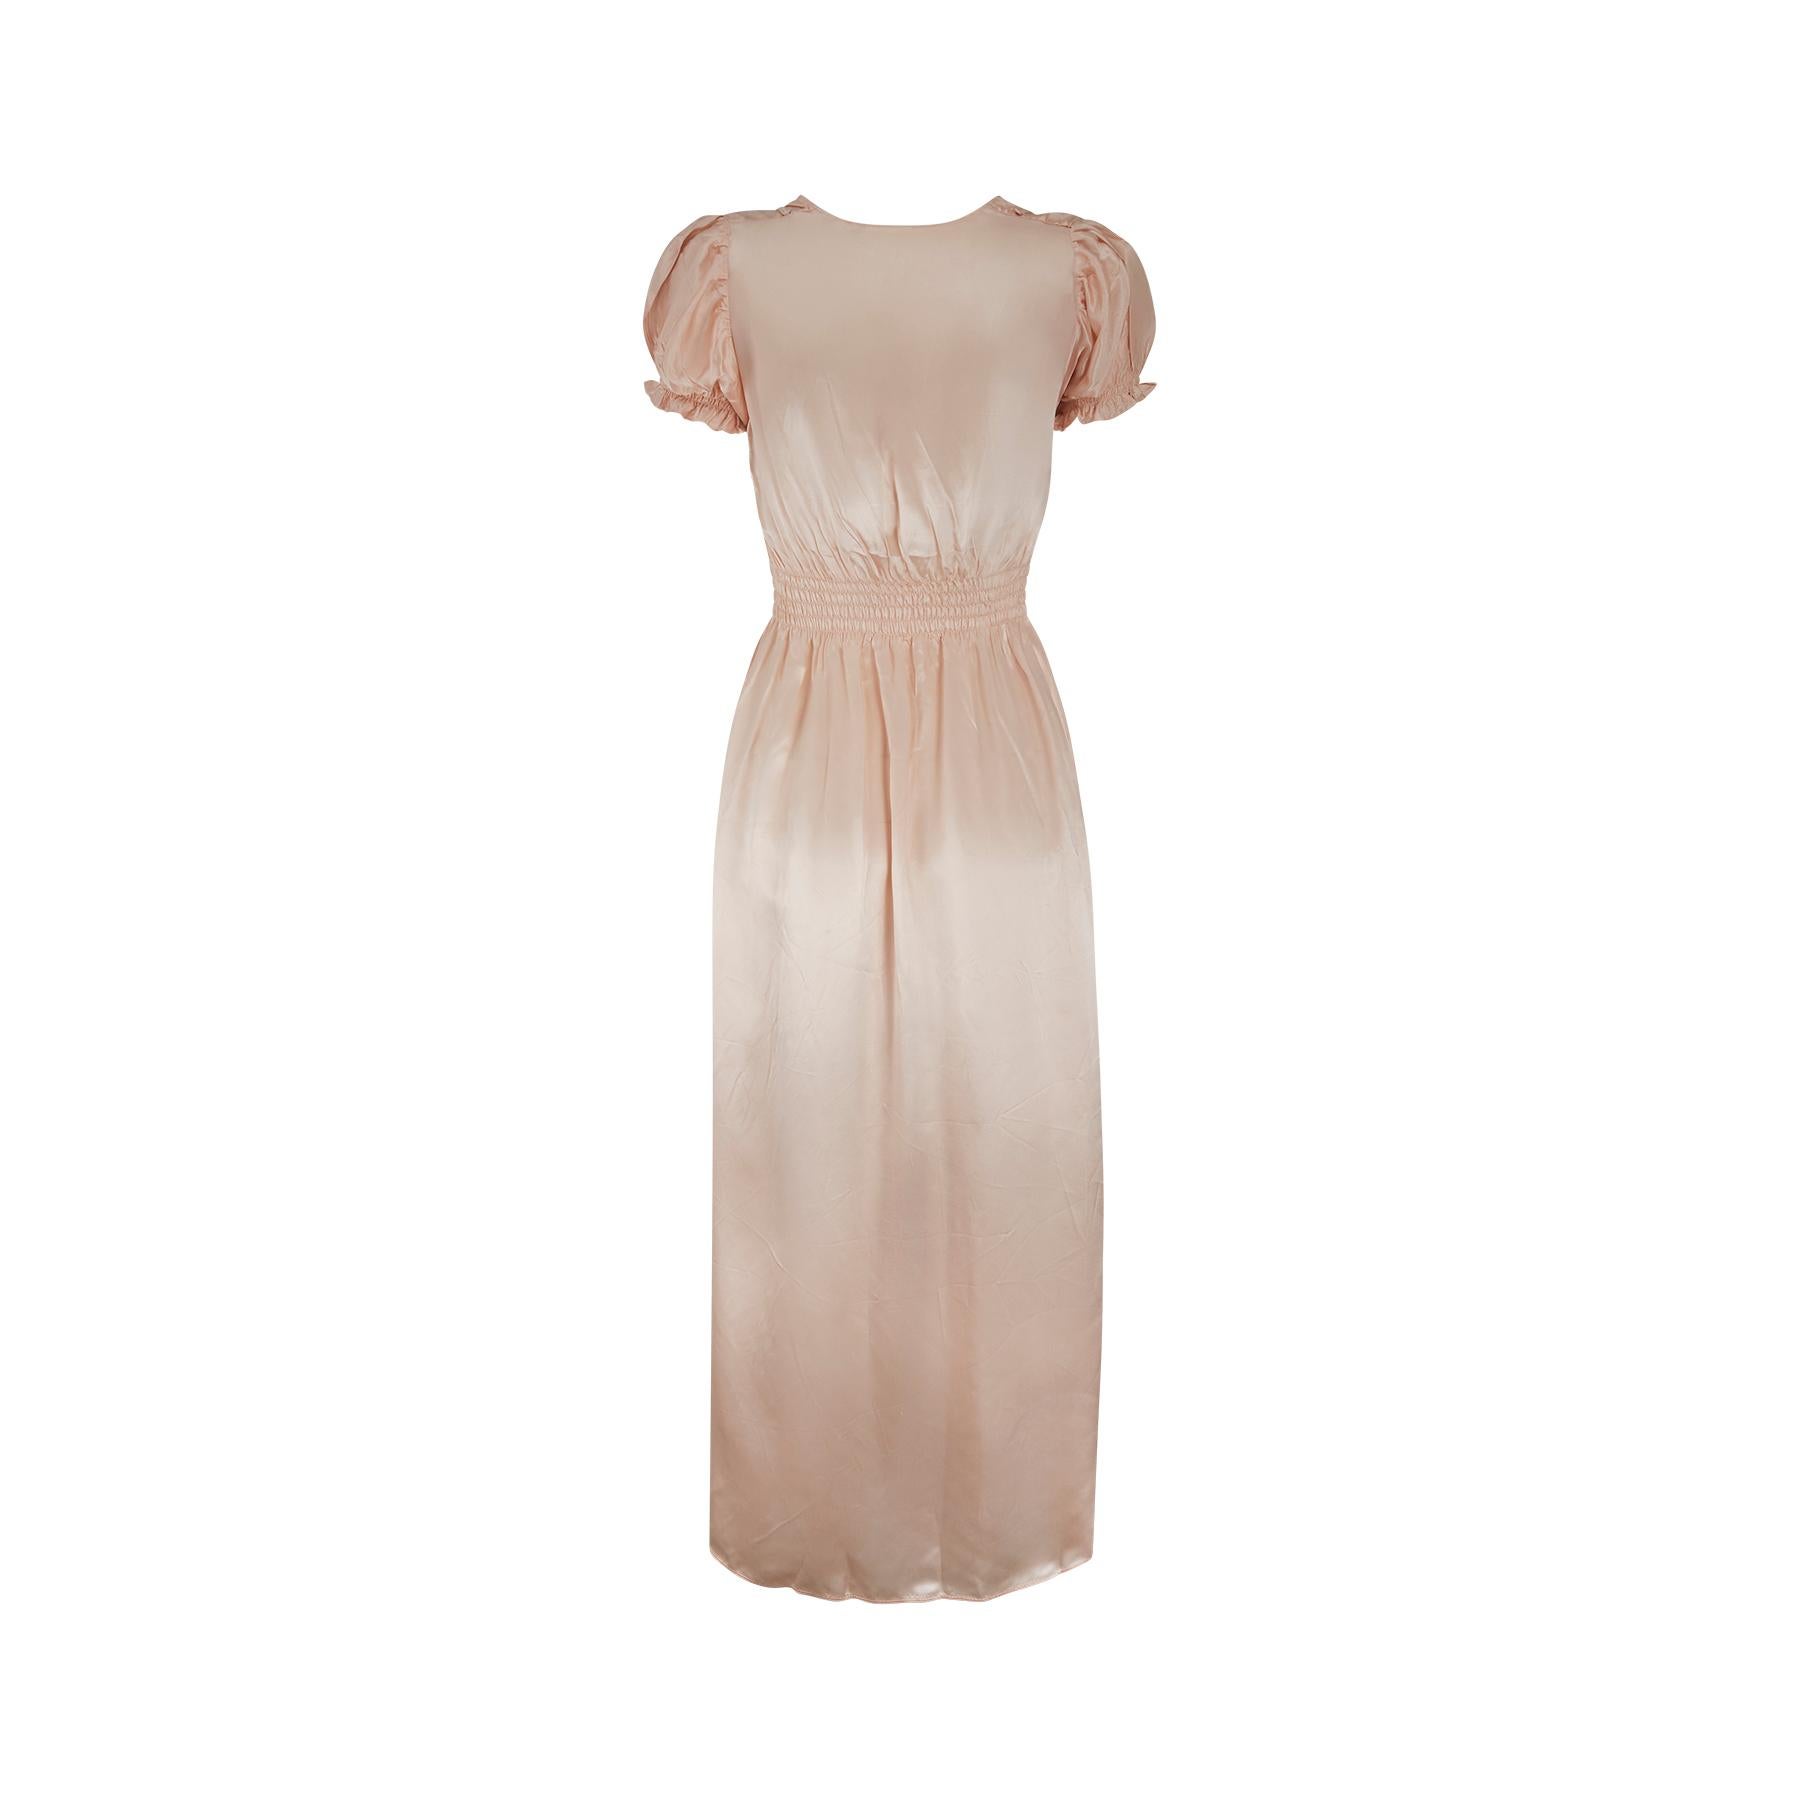 This is a really superb example of early 1940s trousseau nightwear in a wonderful soft peach satin fabric. This dress has elasticated sleeves and a smocked elasticated waistline. The ruffle neckline and dainty puff sleeves make this such a charming